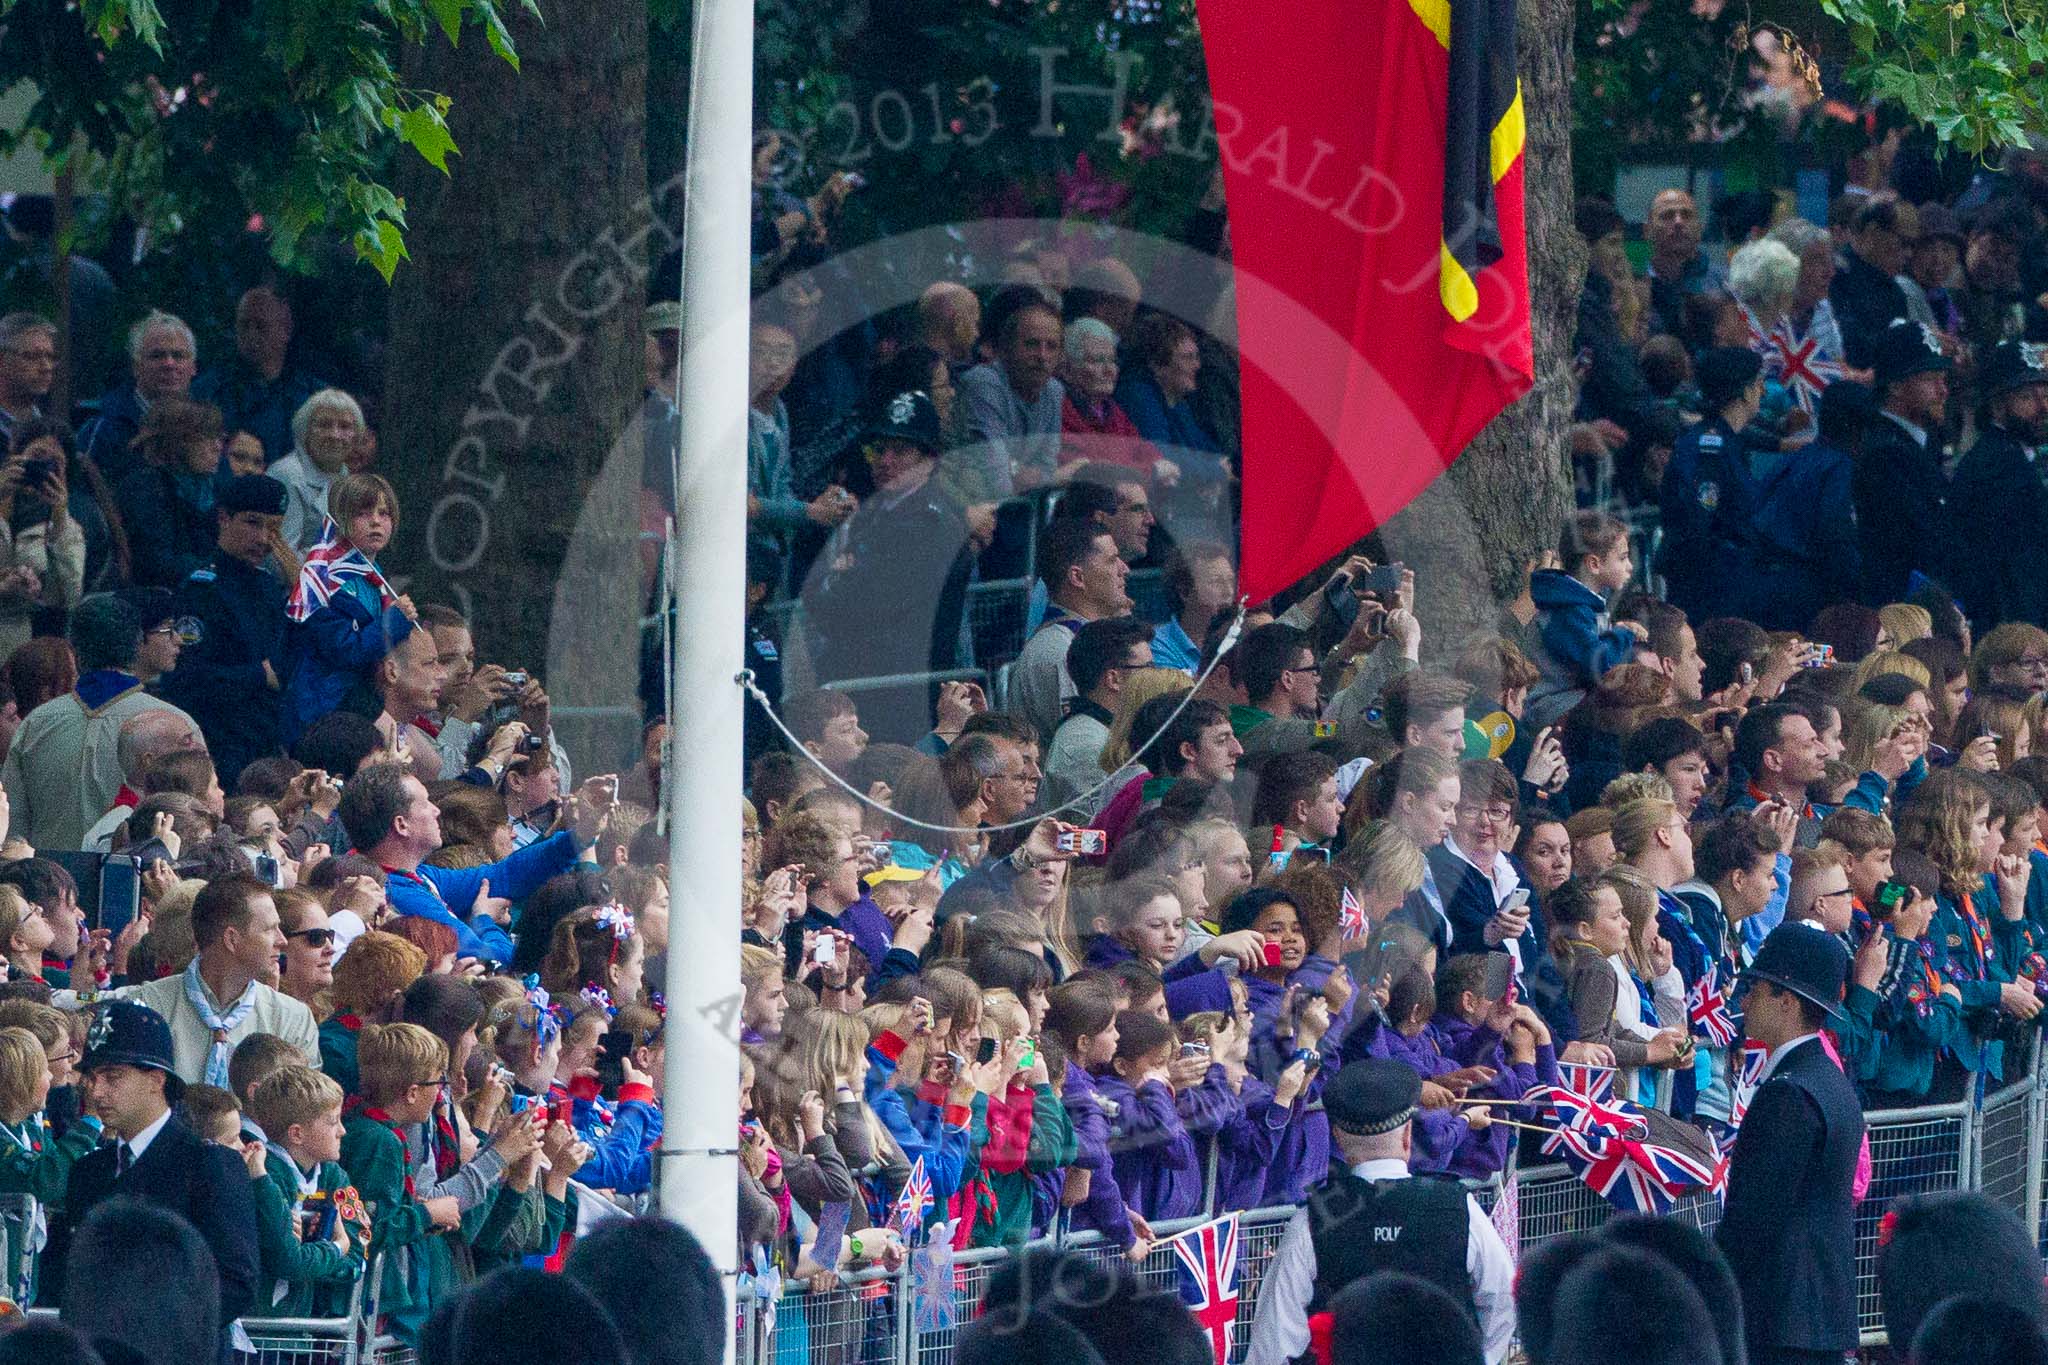 Trooping the Colour 2015. Image #75, 13 June 2015 10:24 Horse Guards Parade, London, UK